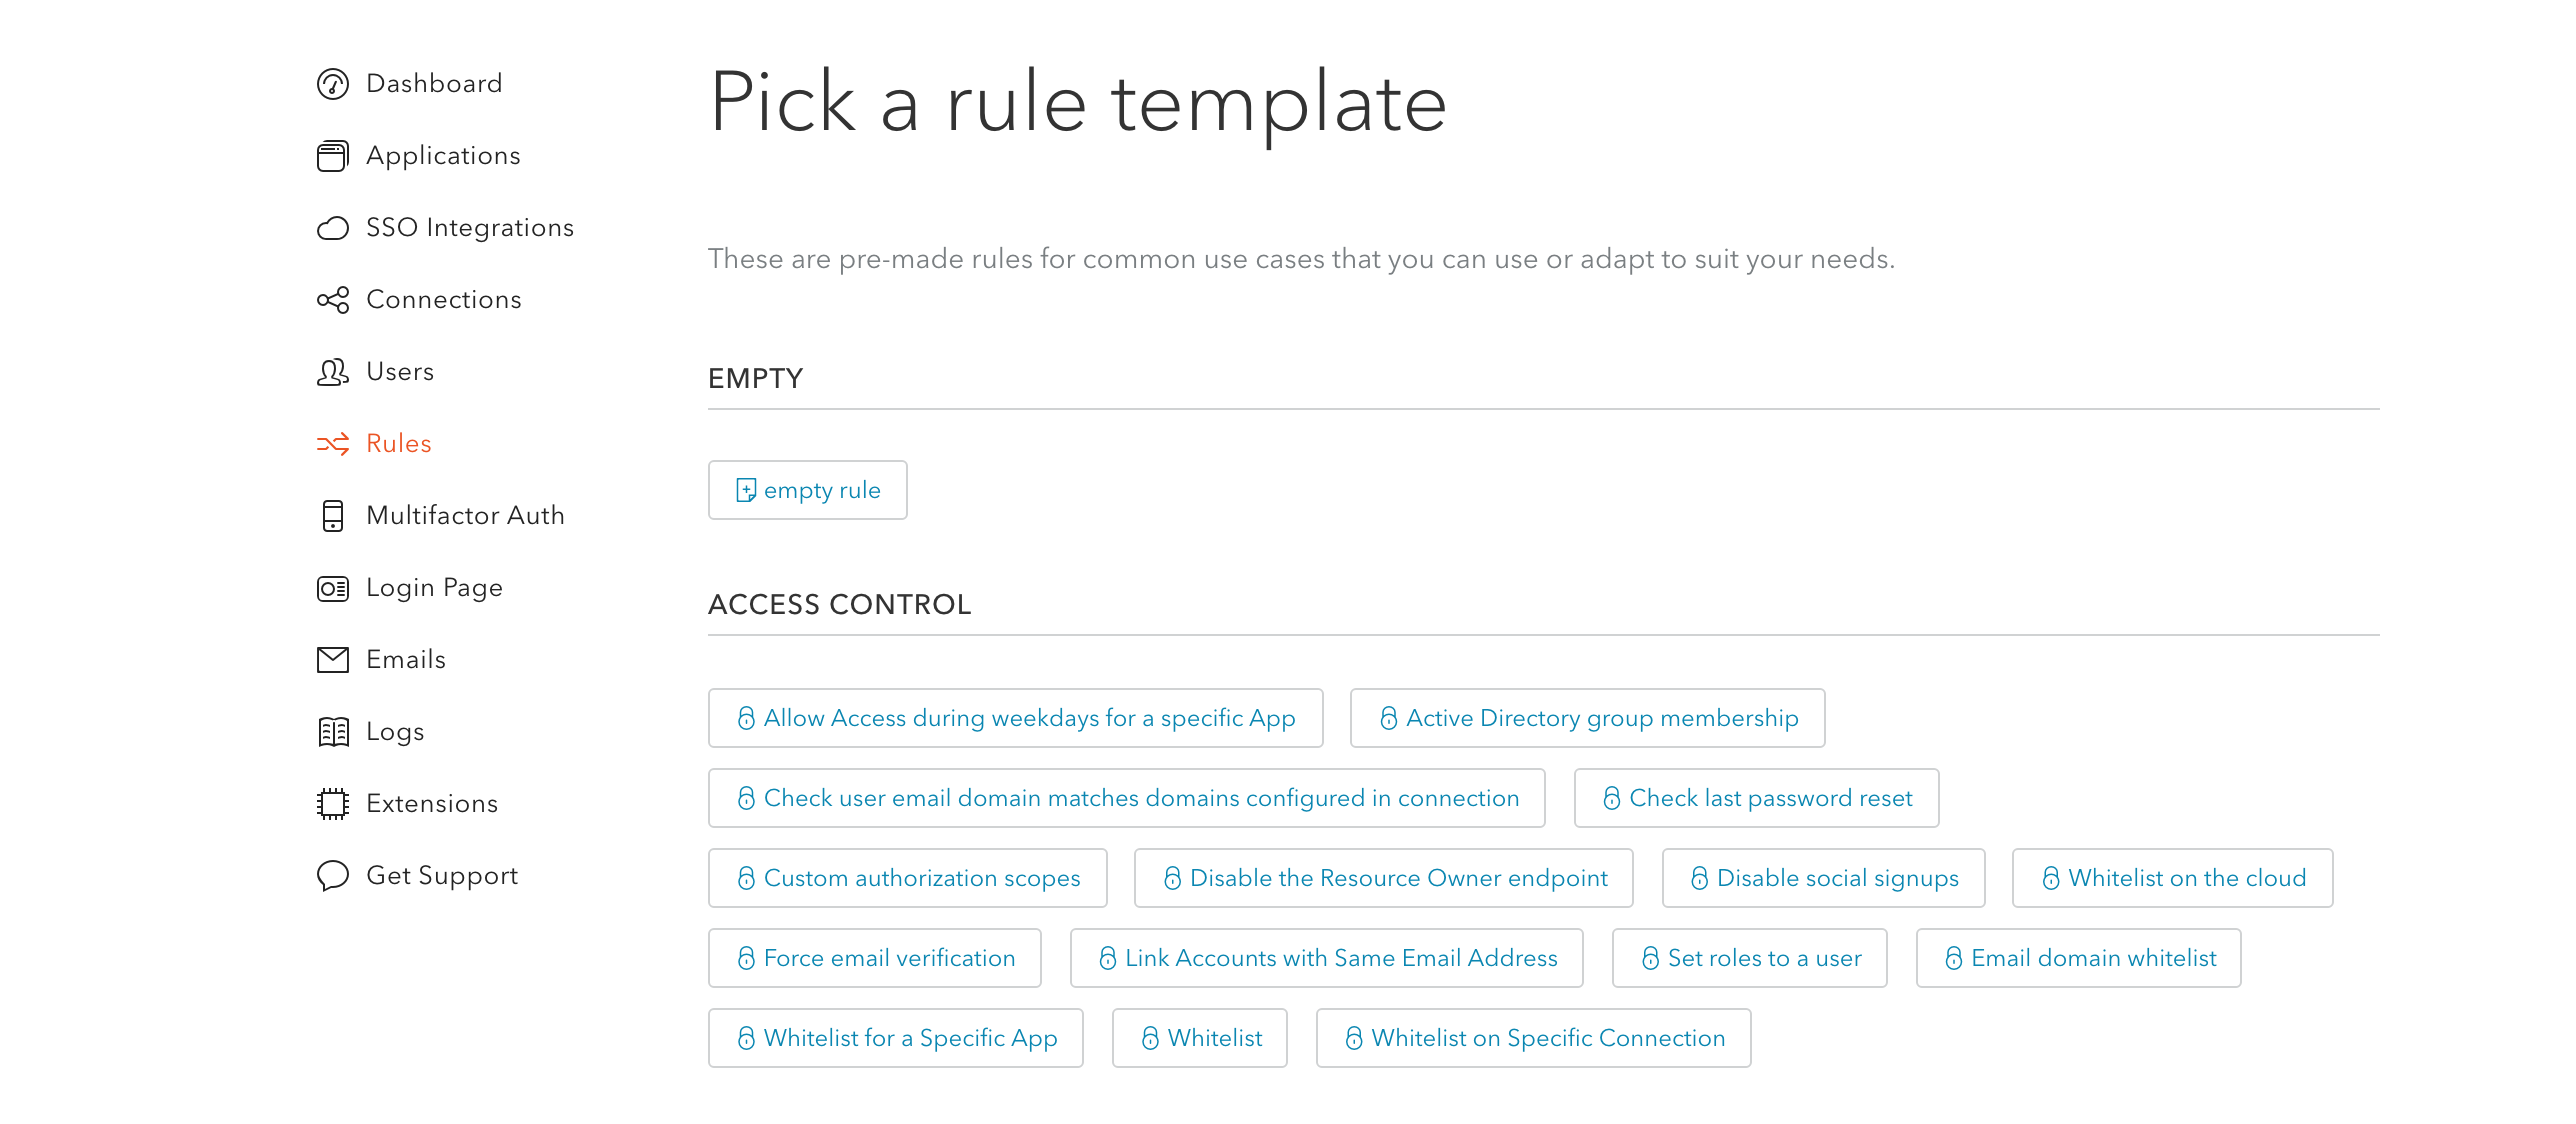 Auth0 provides lots of rule templates for you